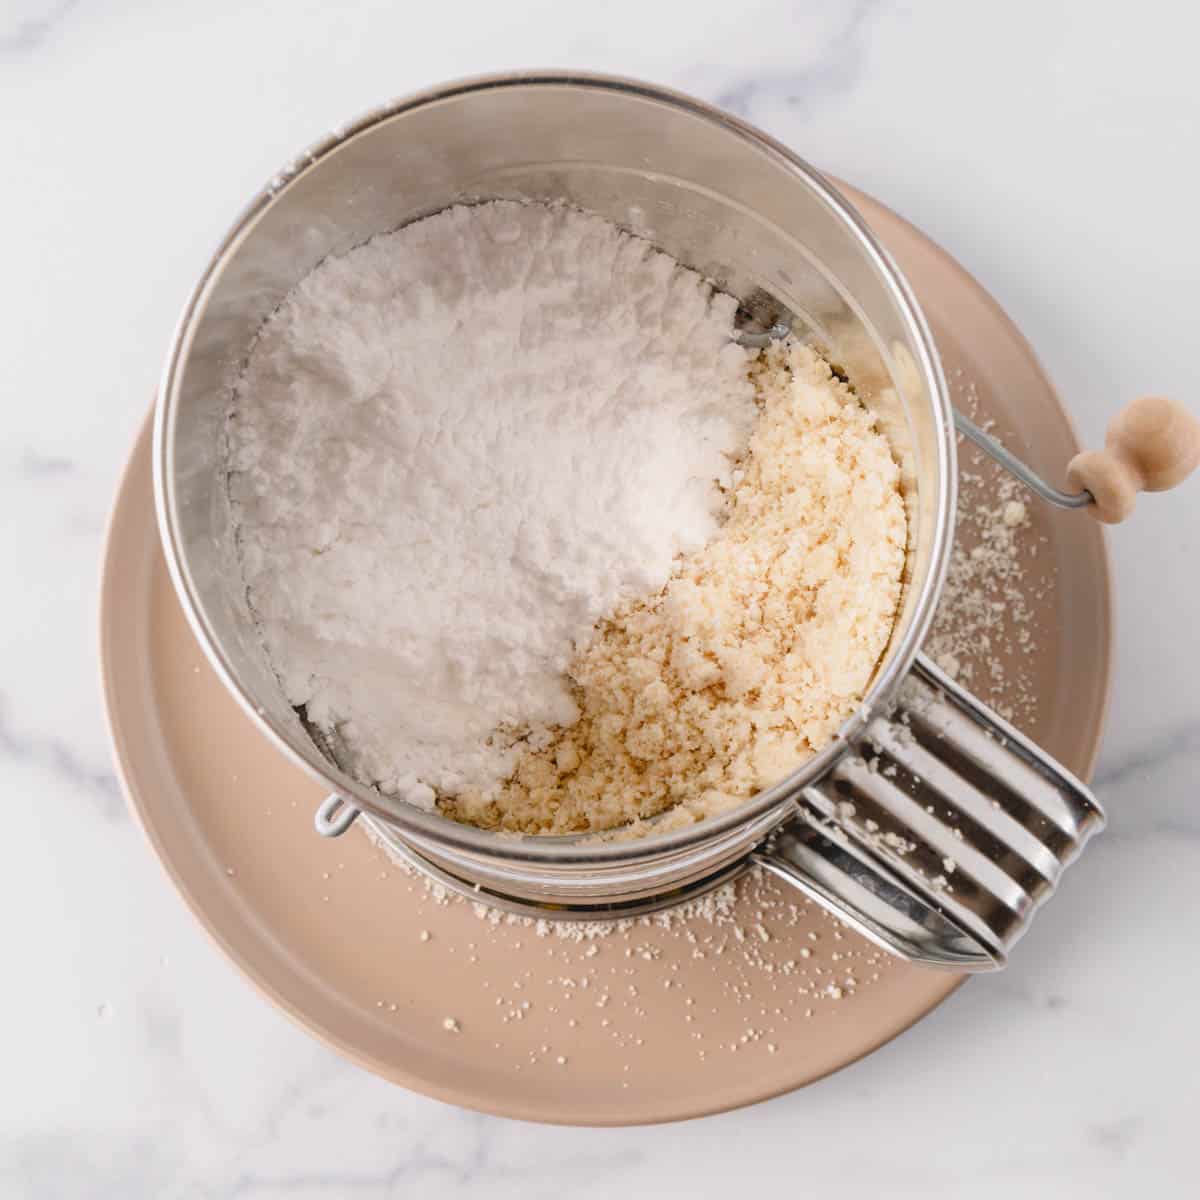 Powdered sugar and almond flour in a hand-crank sift.